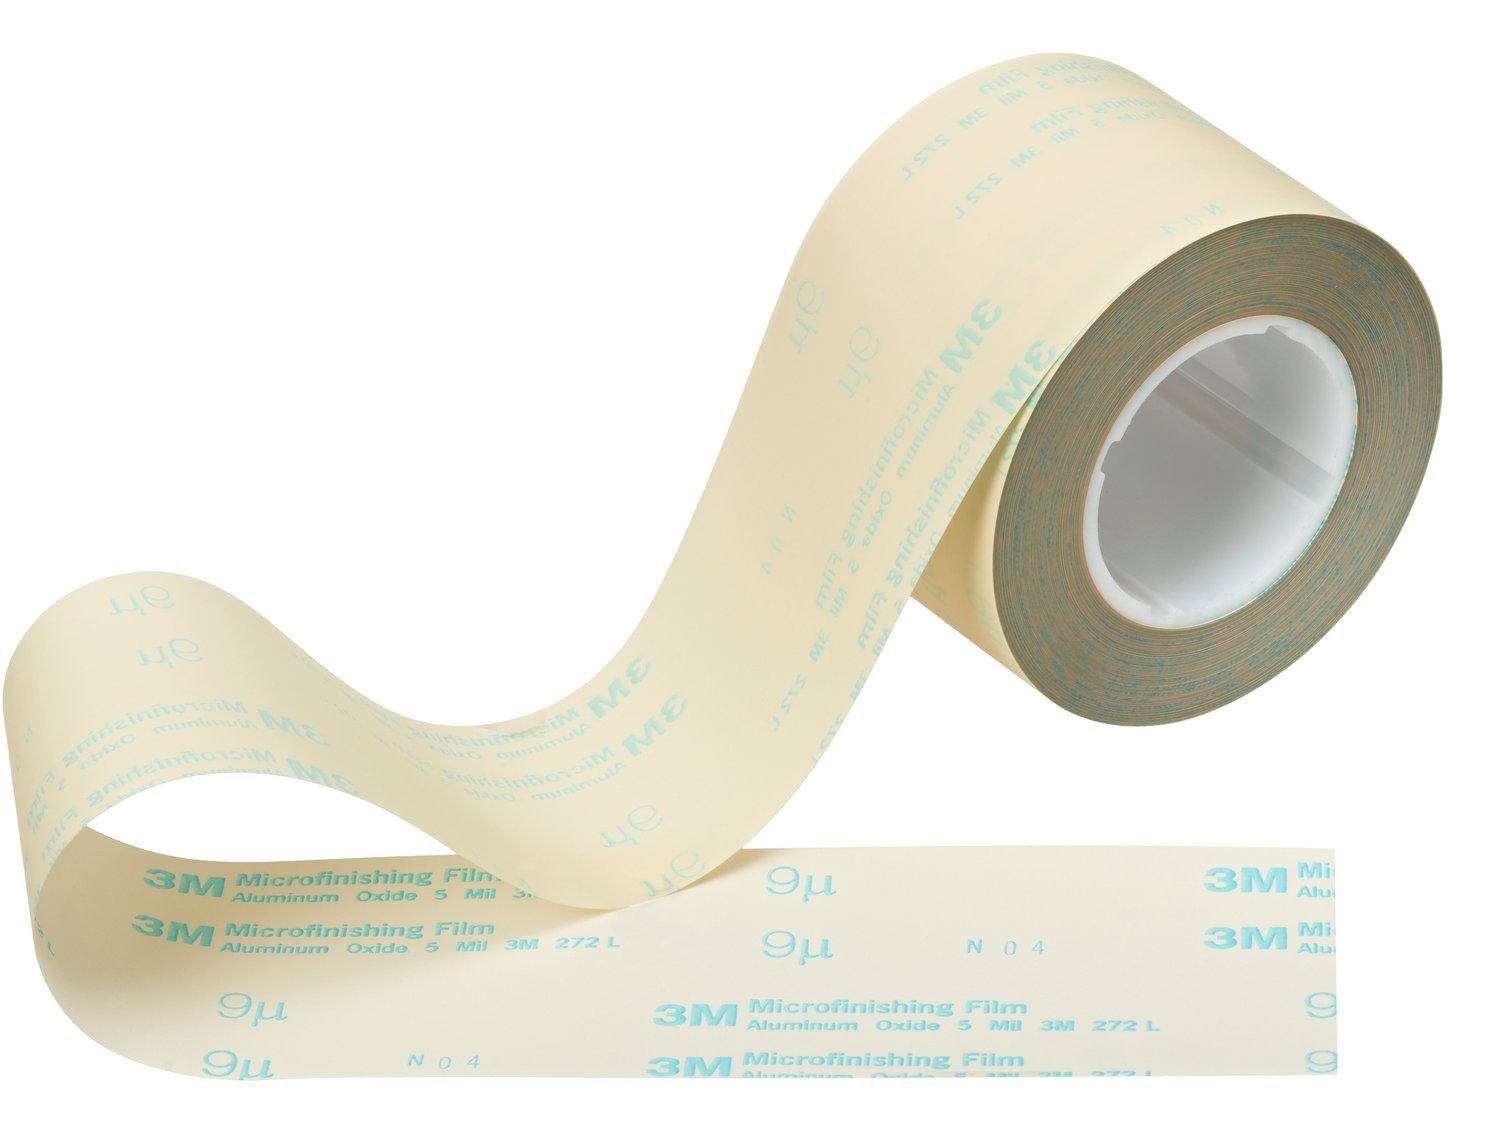 7010533556 - 3M Microfinishing Film Roll 272L, 30 Mic 5MIL, Type UK, 12 in x 150 ft
x 3 in (304.8mmx45.75m), Keyed Core, ASO